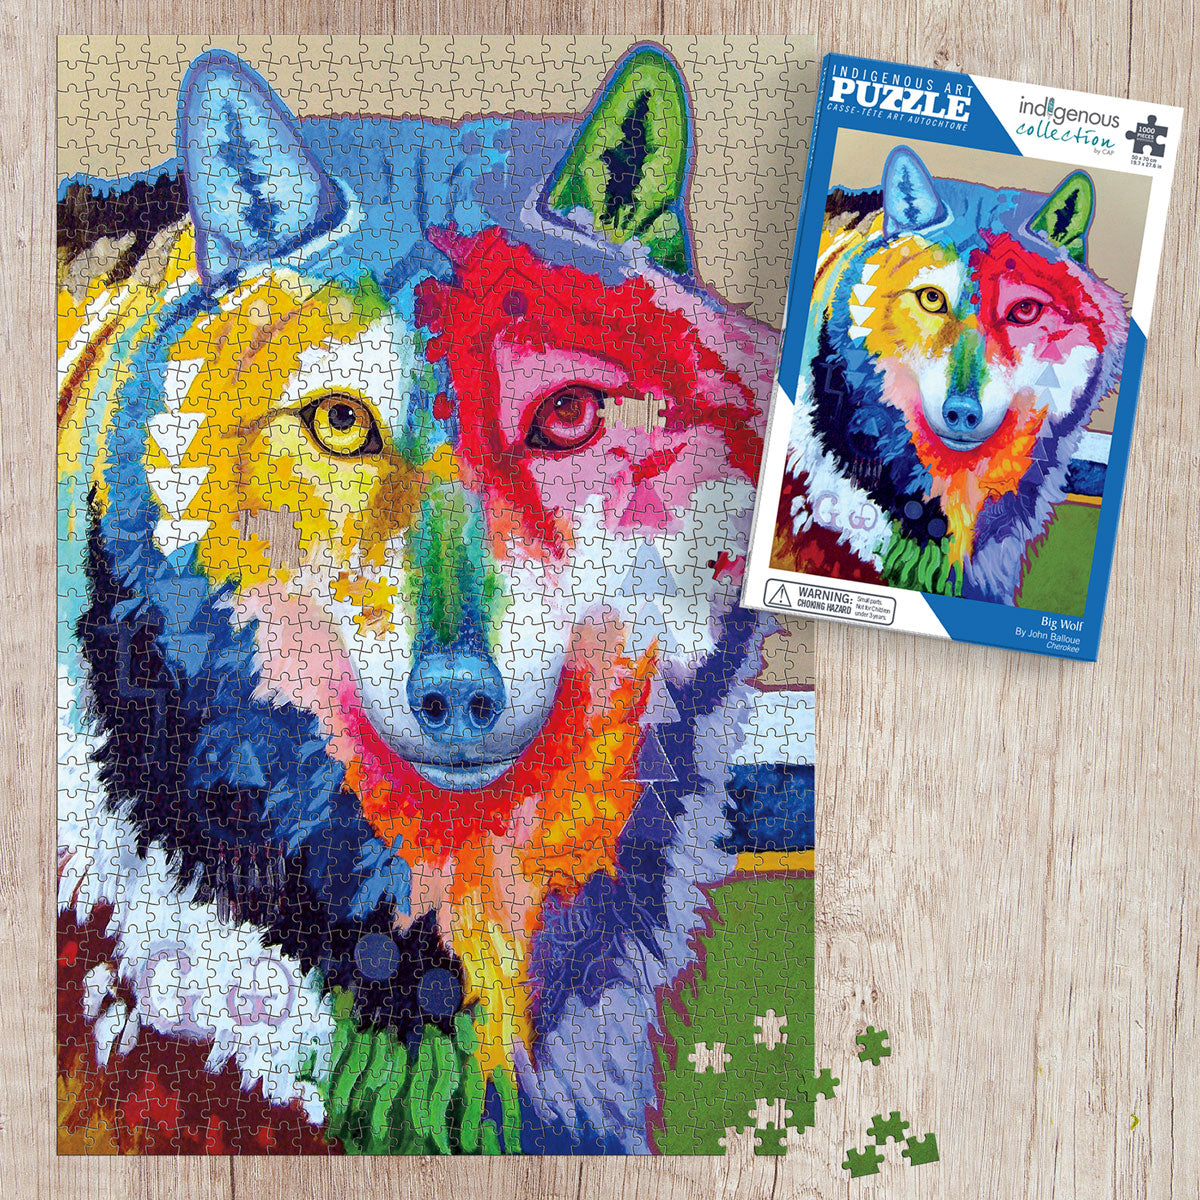 Puzzles – Indigenous Collection